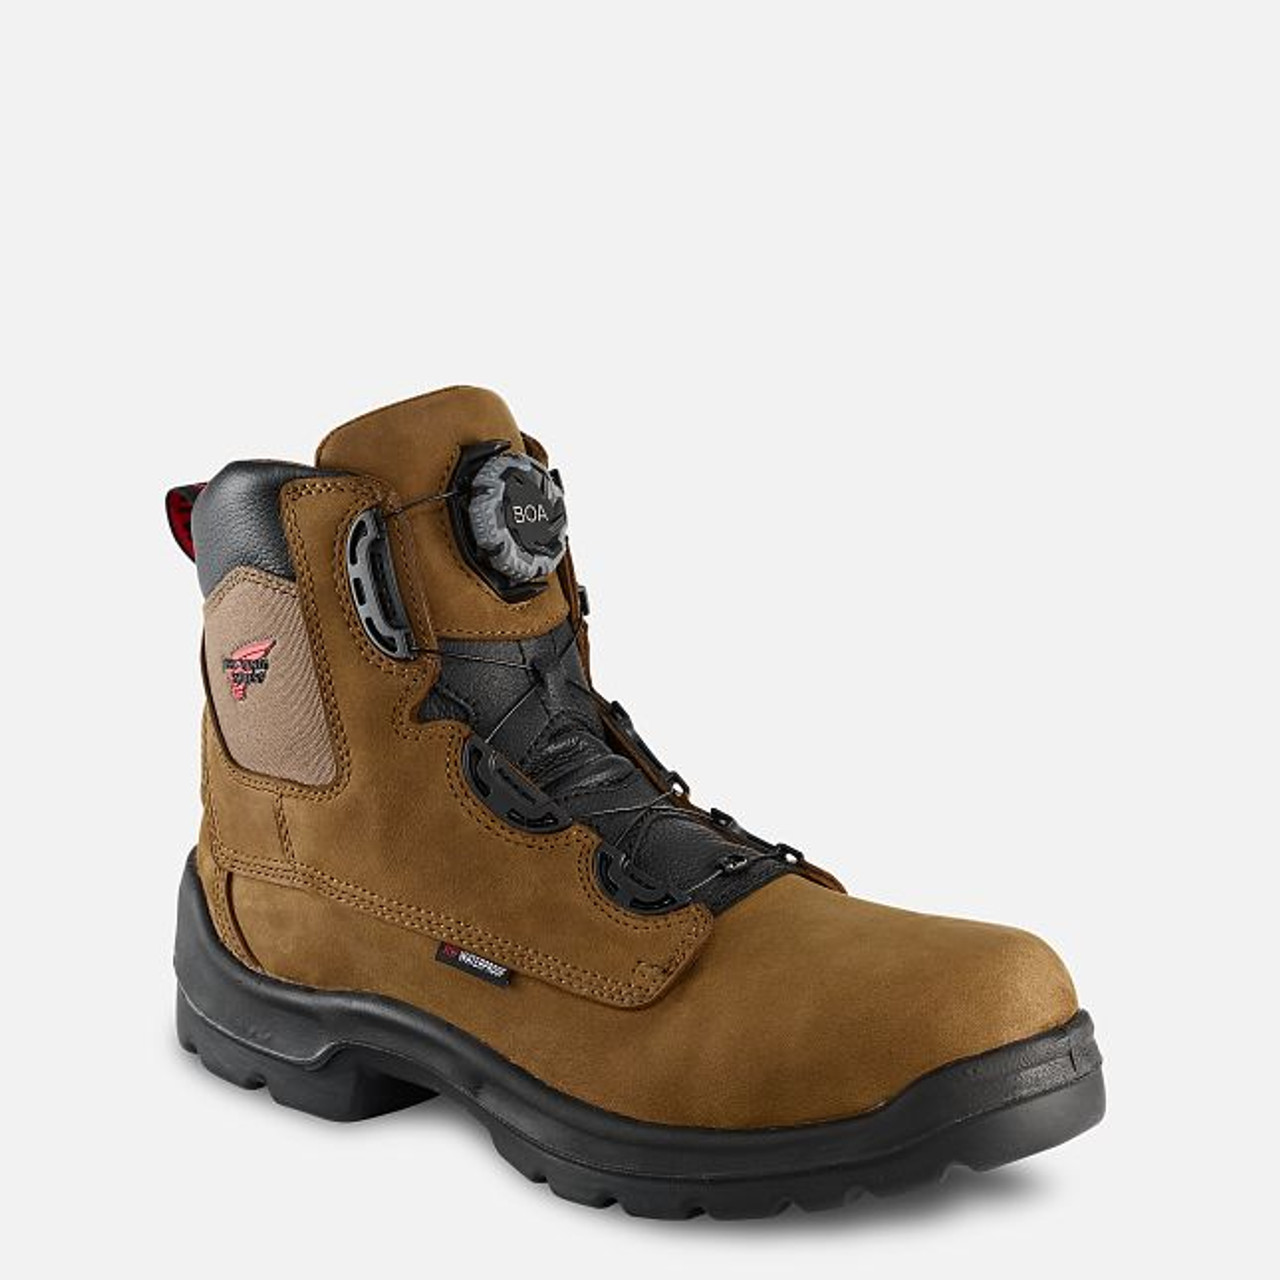 Red Wing Shoes® Men's Flexbond 6 Boa Safety Toe Waterproof